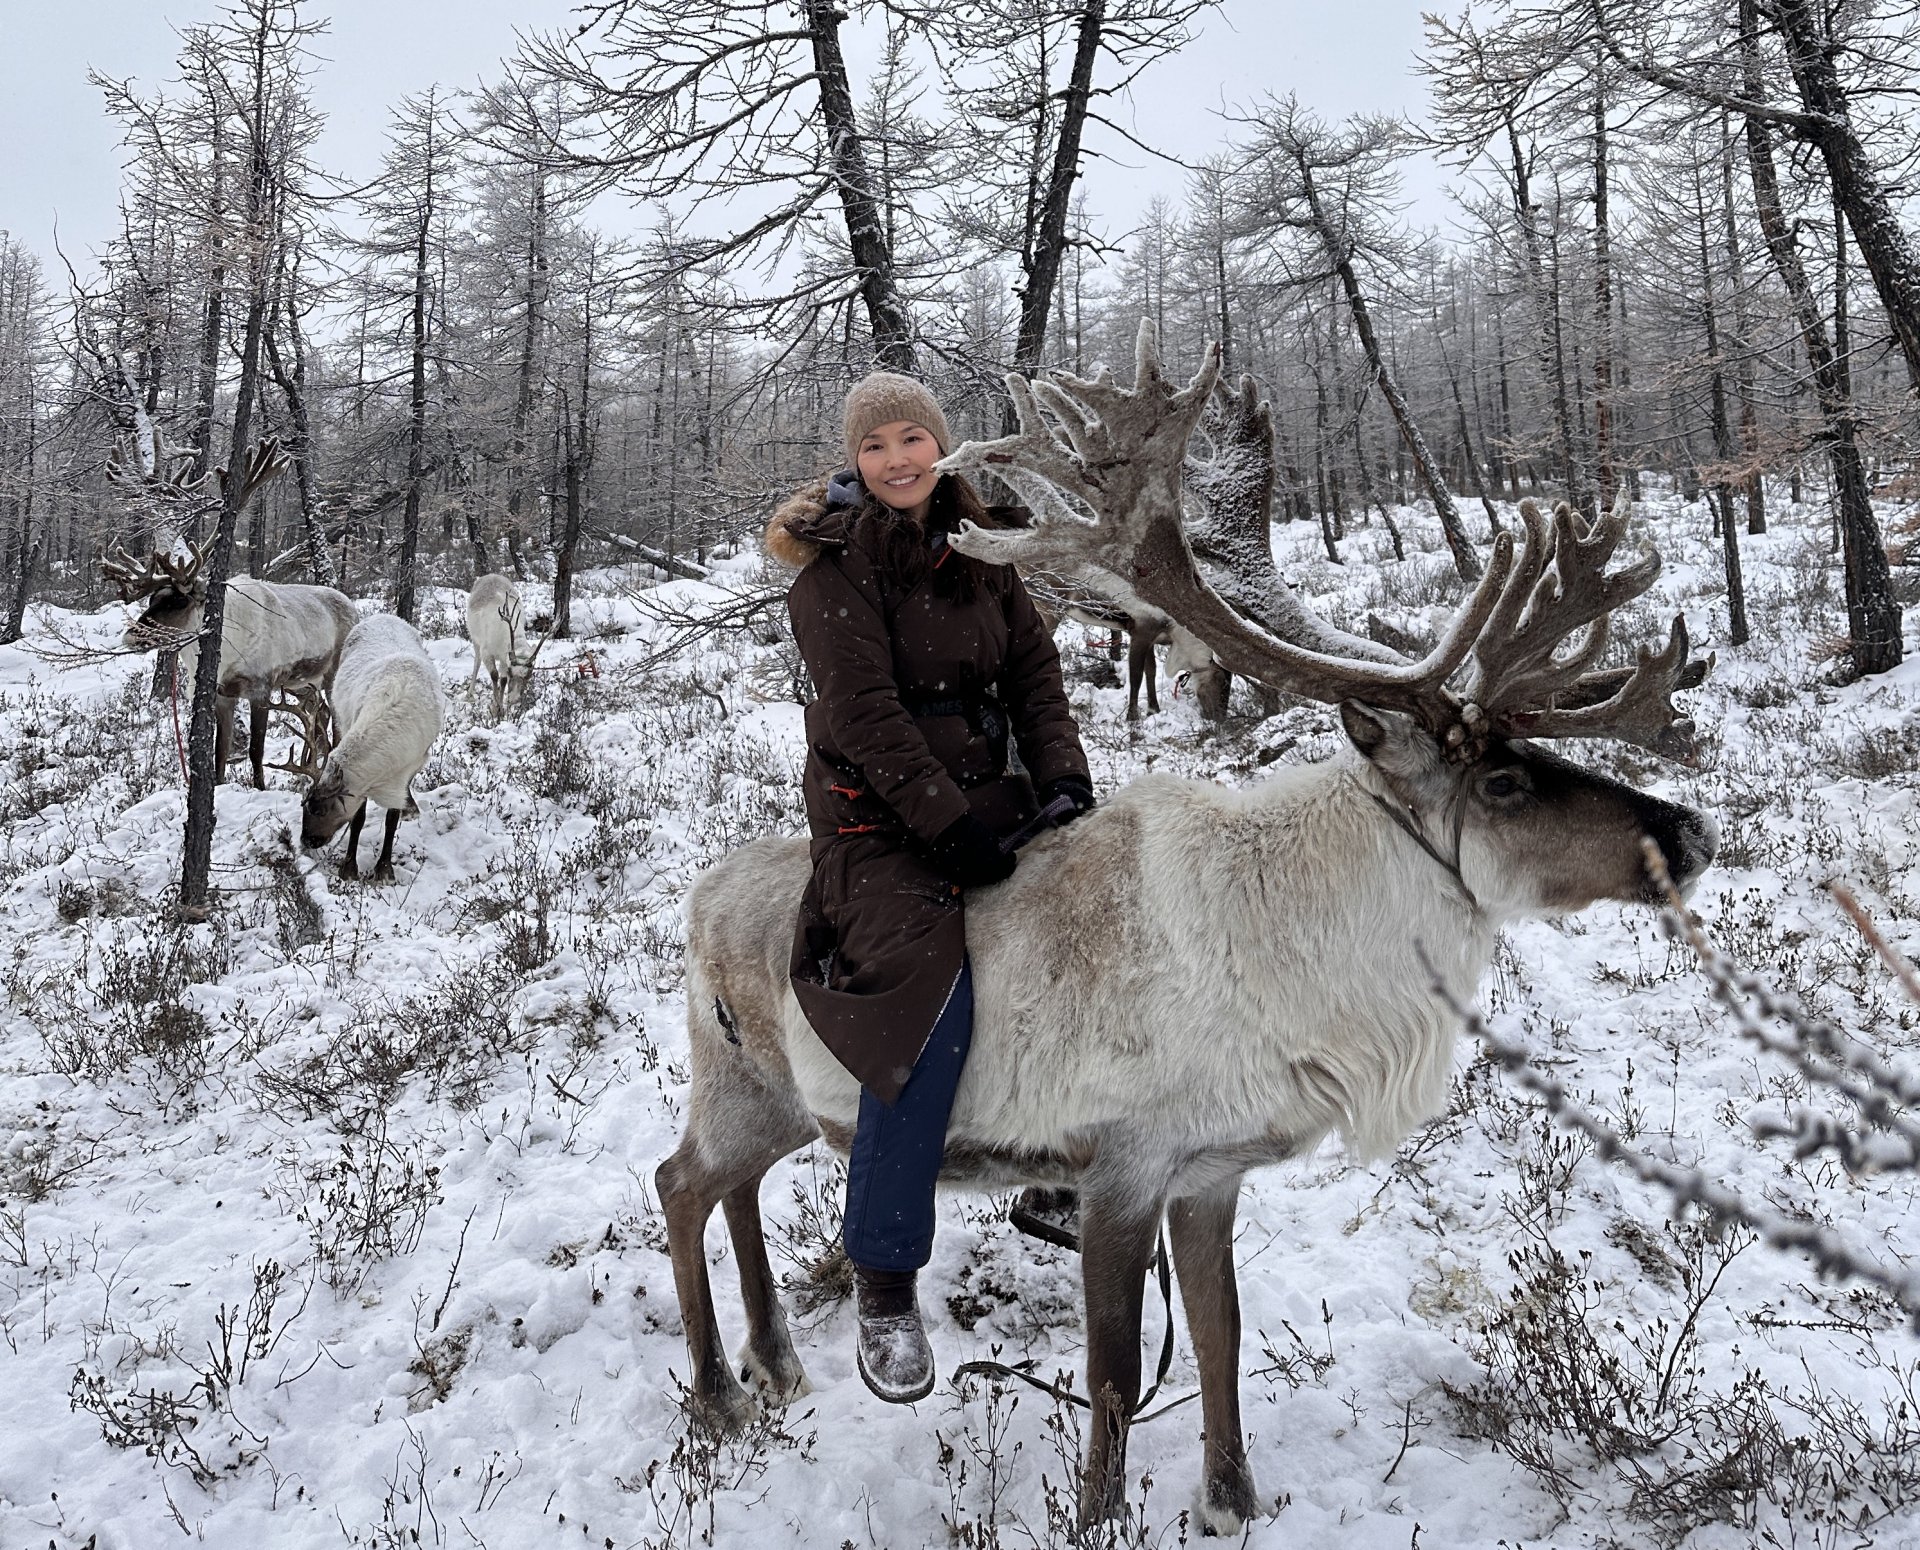 If you’d like to know more about reindeer, check out these 20 interesting facts!